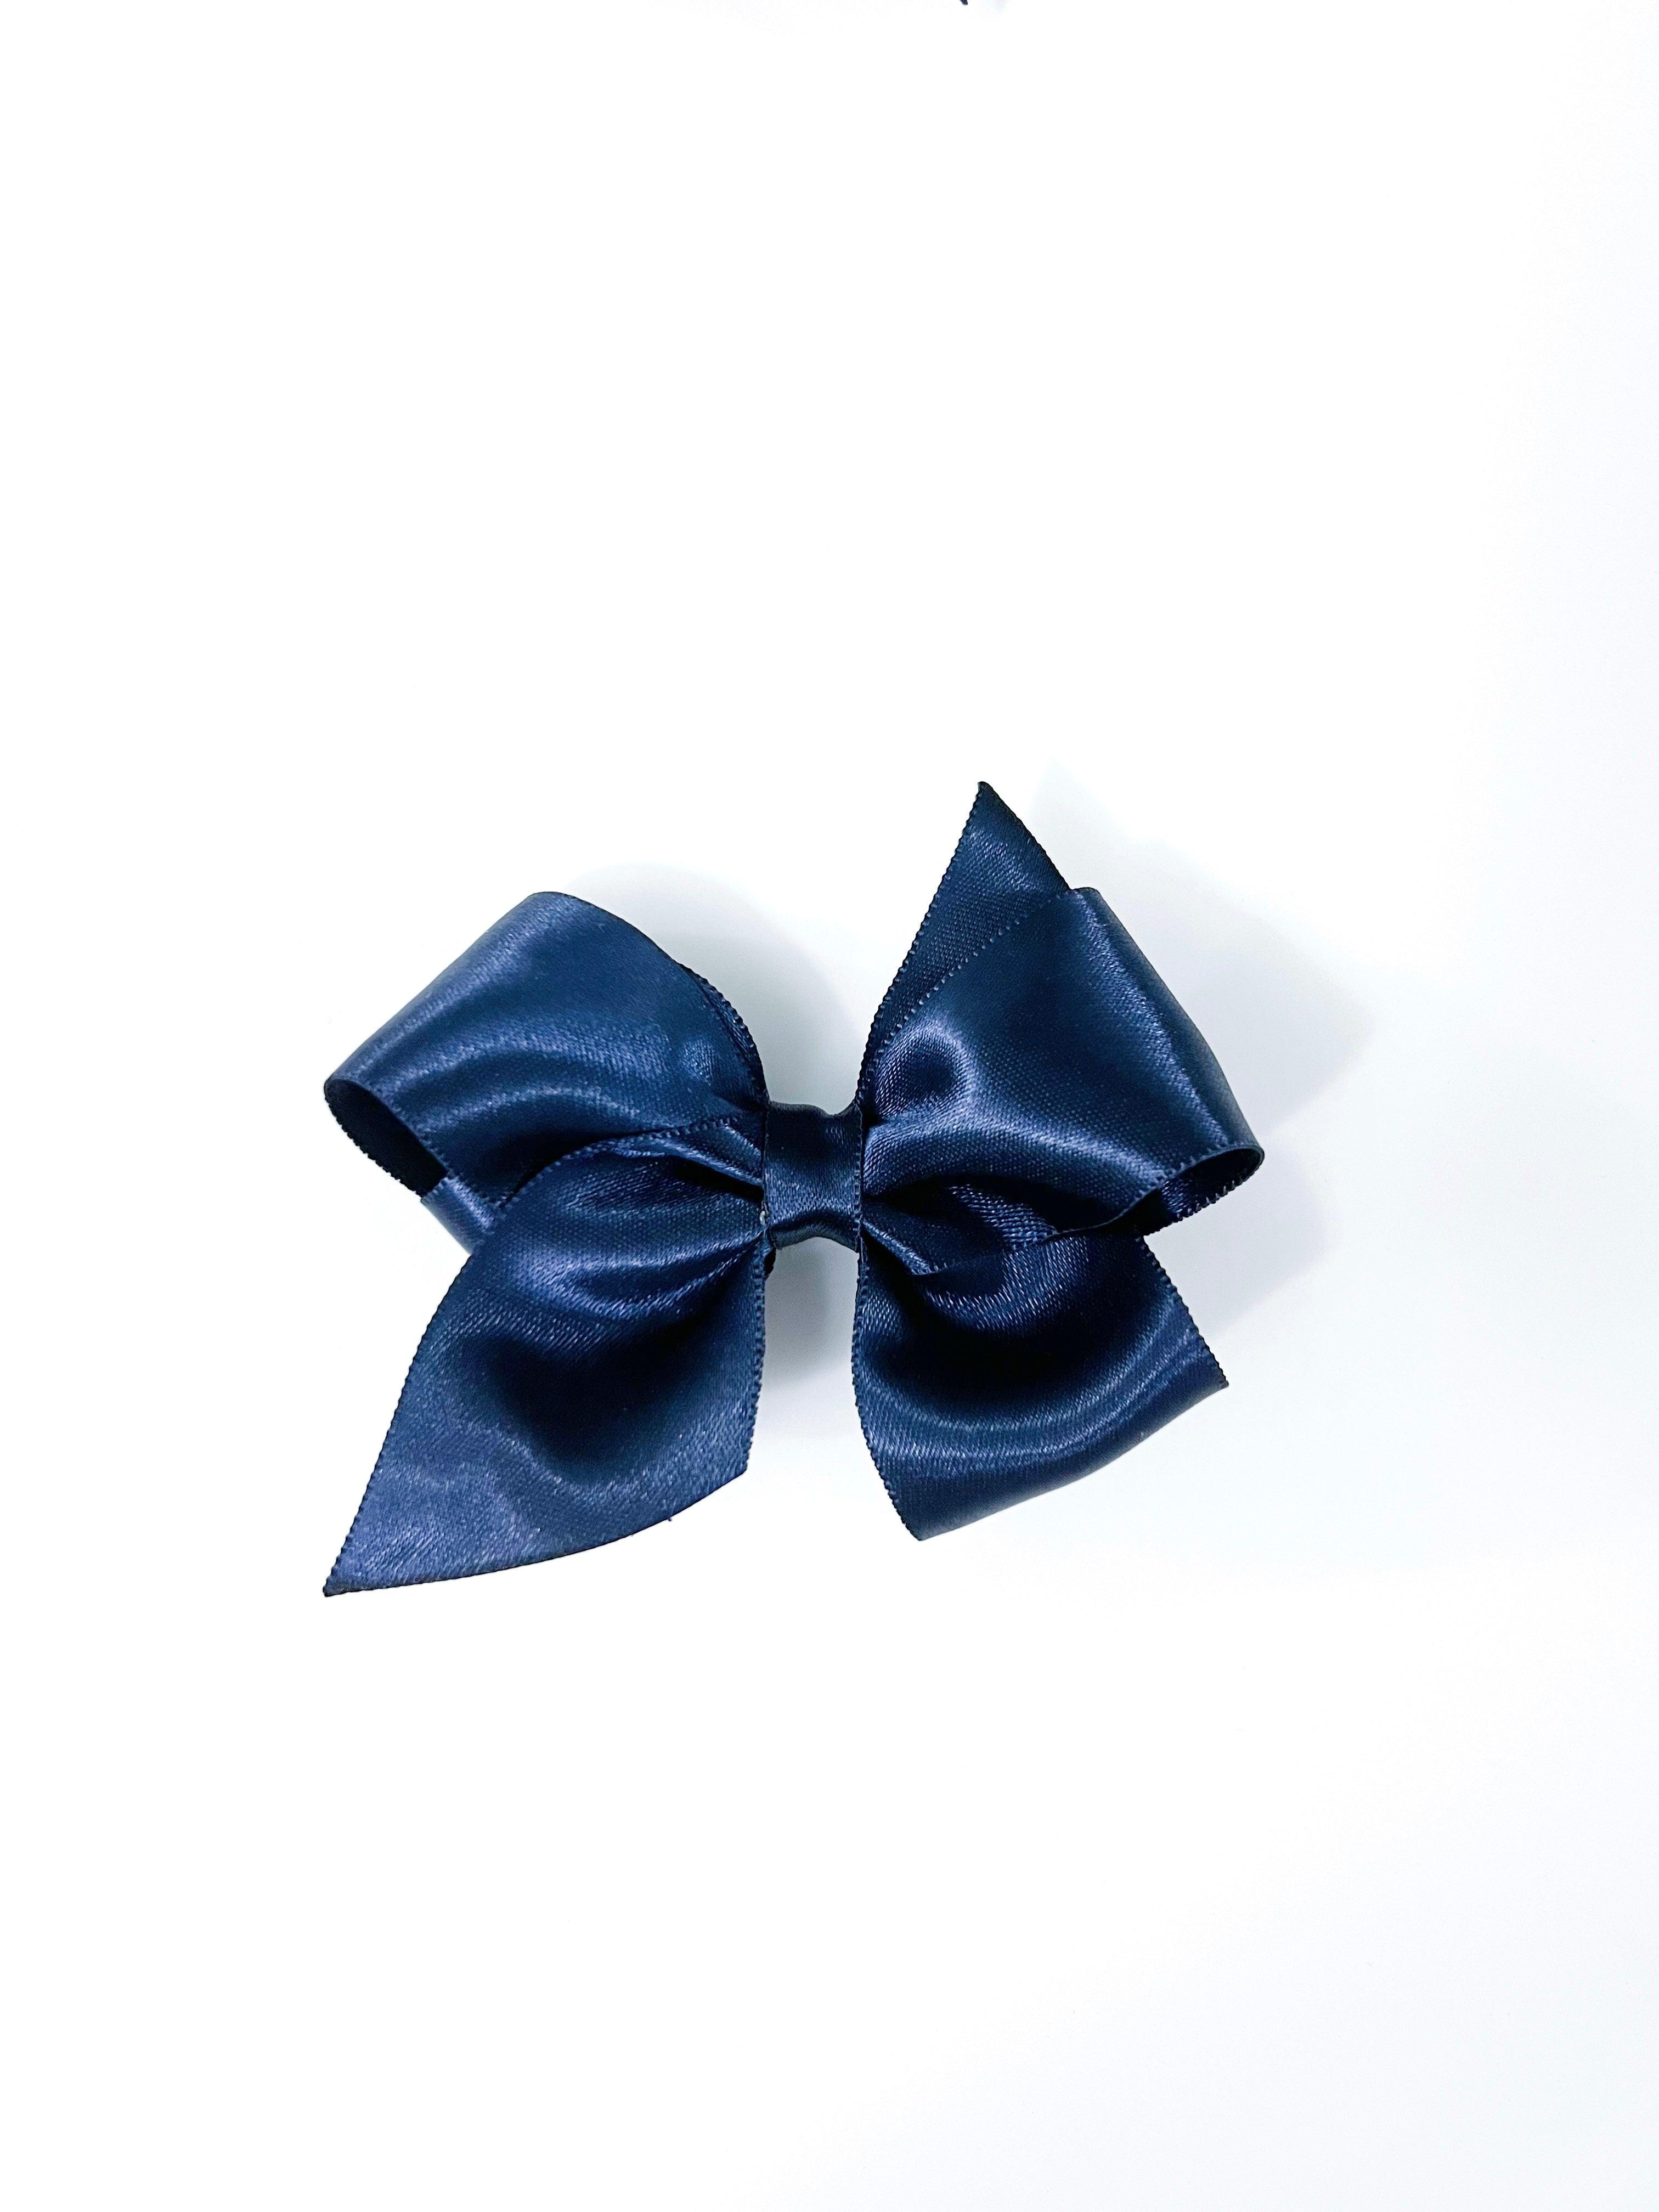 Sissy Bow - Navy Satin | Nashville Bow Co. - Classic Hair Bows, Bow Ties, Basket Bows, Pacifier Clips, Wreath Sashes, Swaddle Bows. Classic Southern Charm.